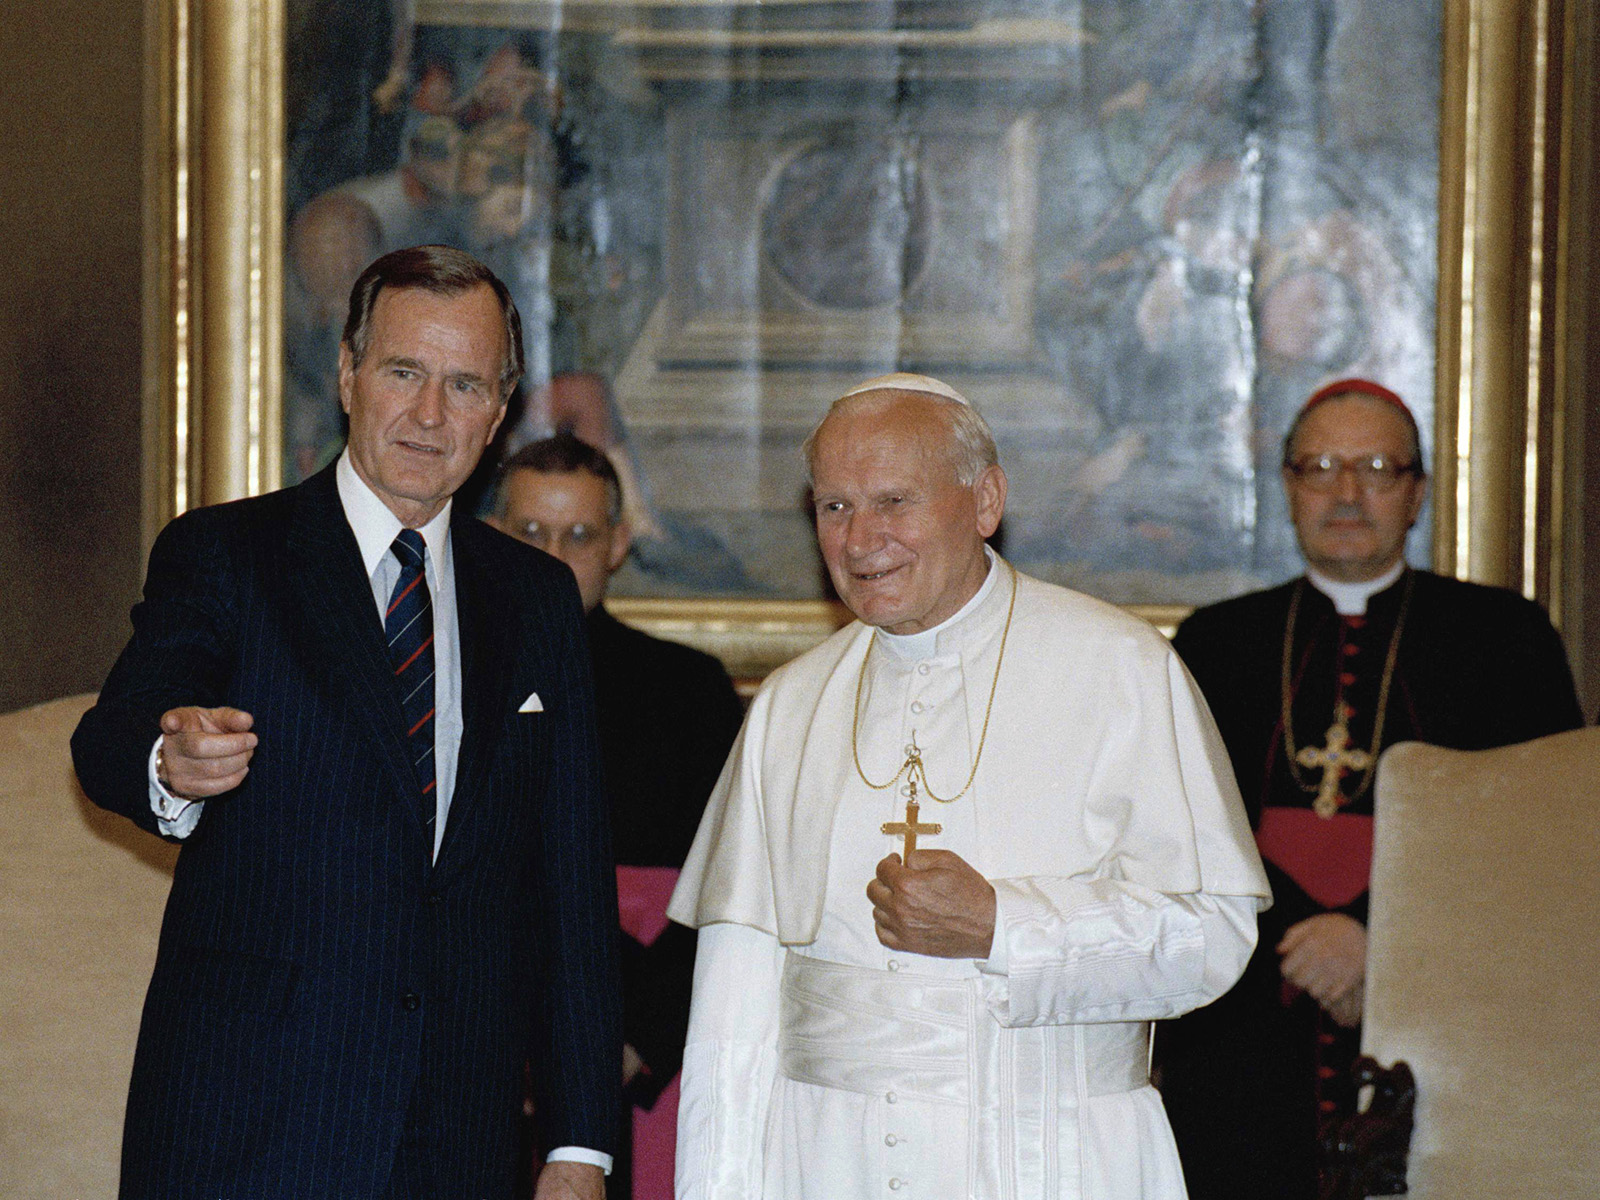 FILE - In this May 27, 1989, file photo, President George H. W. Bush gestures while standing with Pope John Paul II in the papal library at the Vatican. (AP Photo/Ron Edmonds, File)